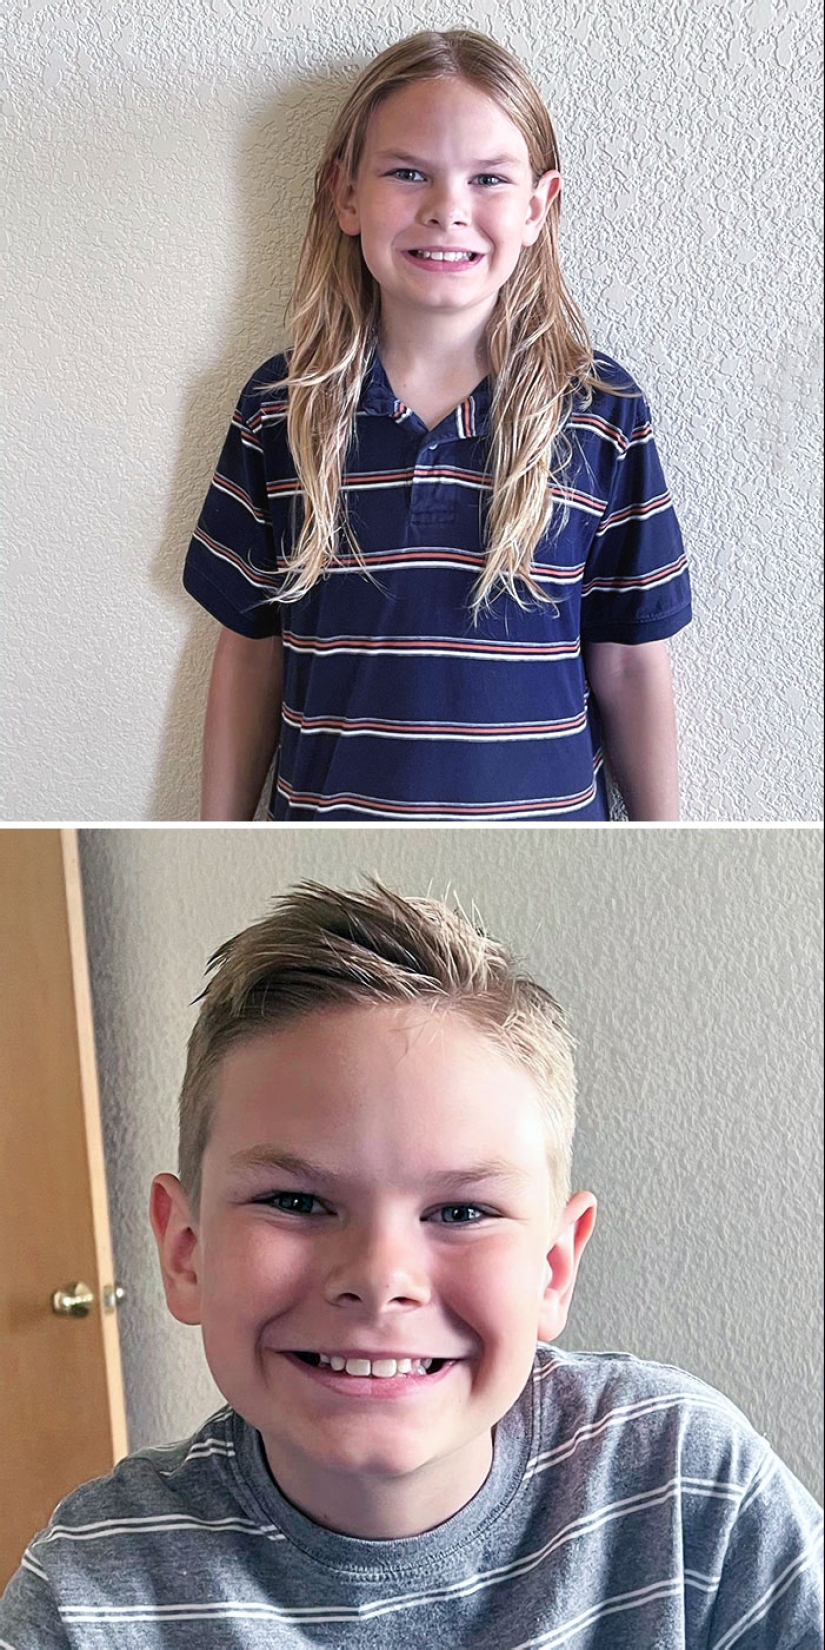 15 People Before And After Cutting Off Their Long Hair To Donate It